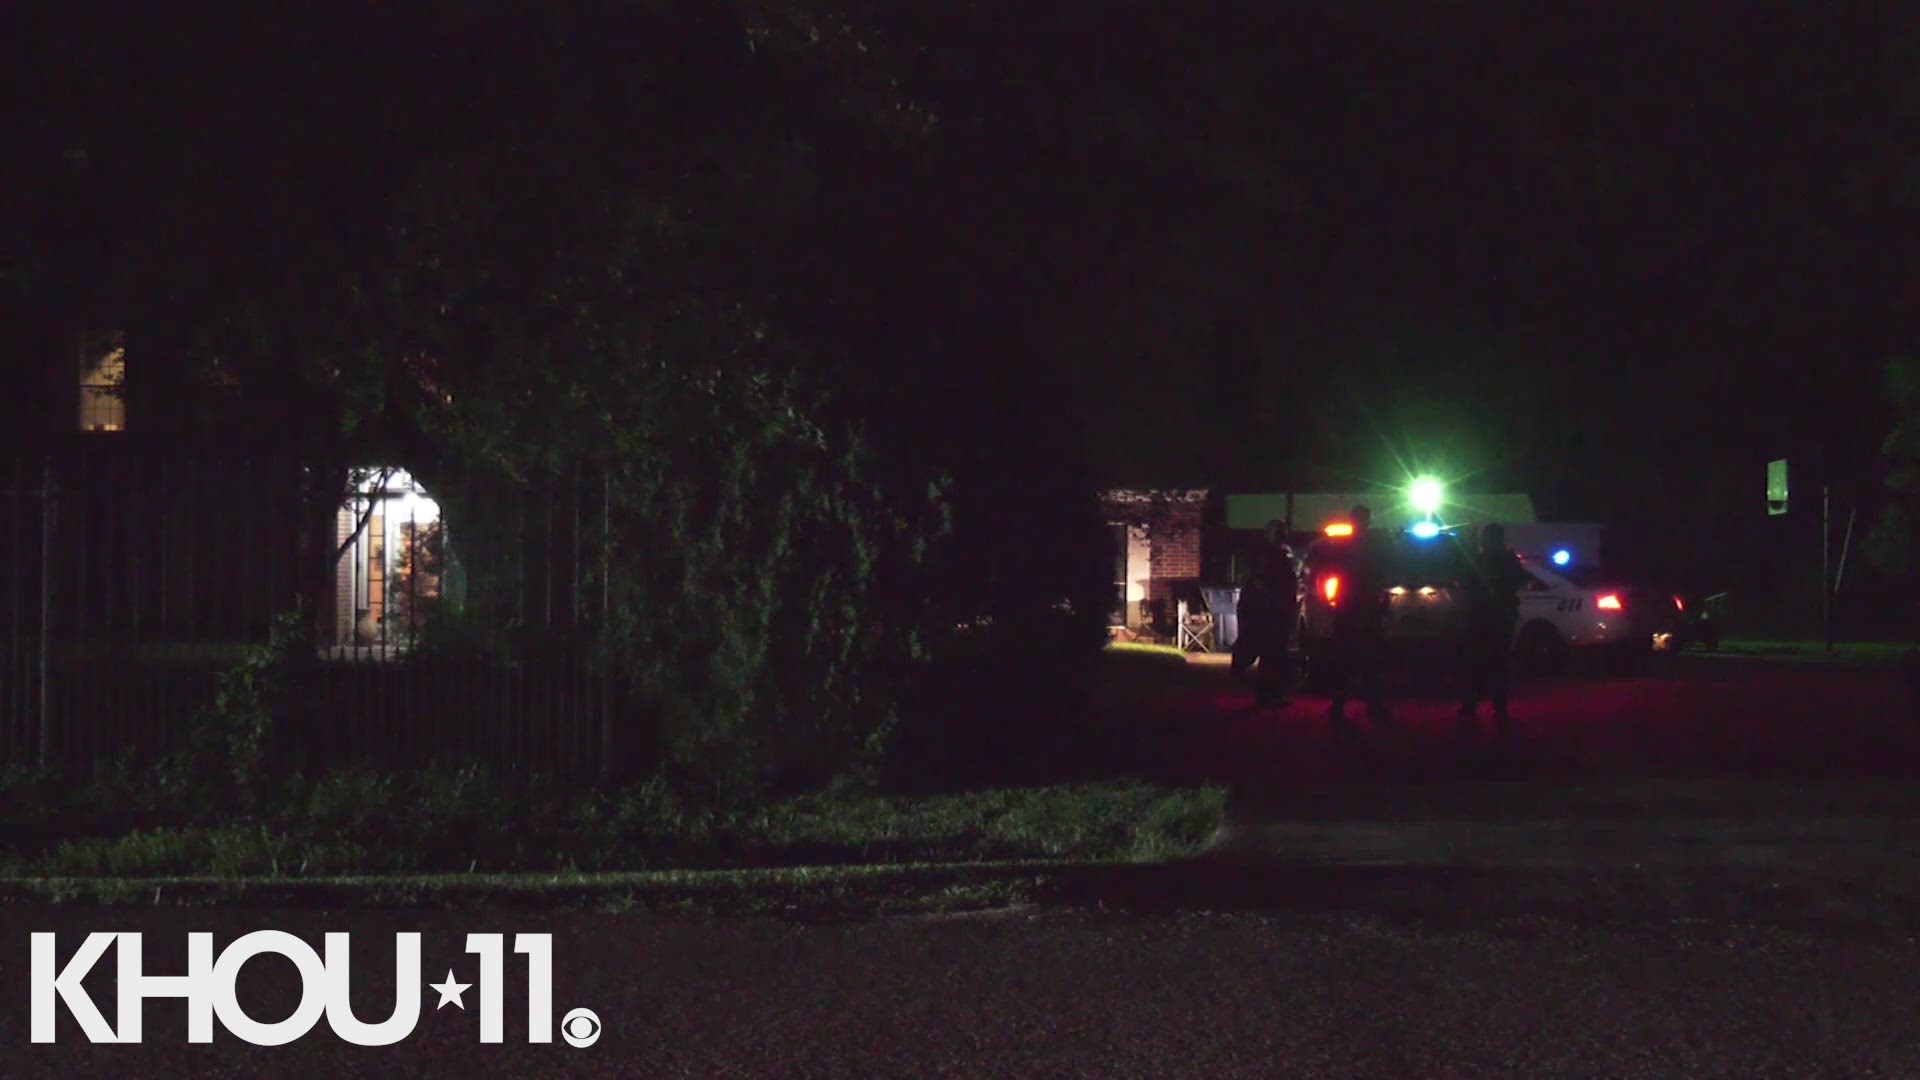 Homicide detectives are investigating after a 4-year-old dies after being found face down in a bathtub in Tomball.